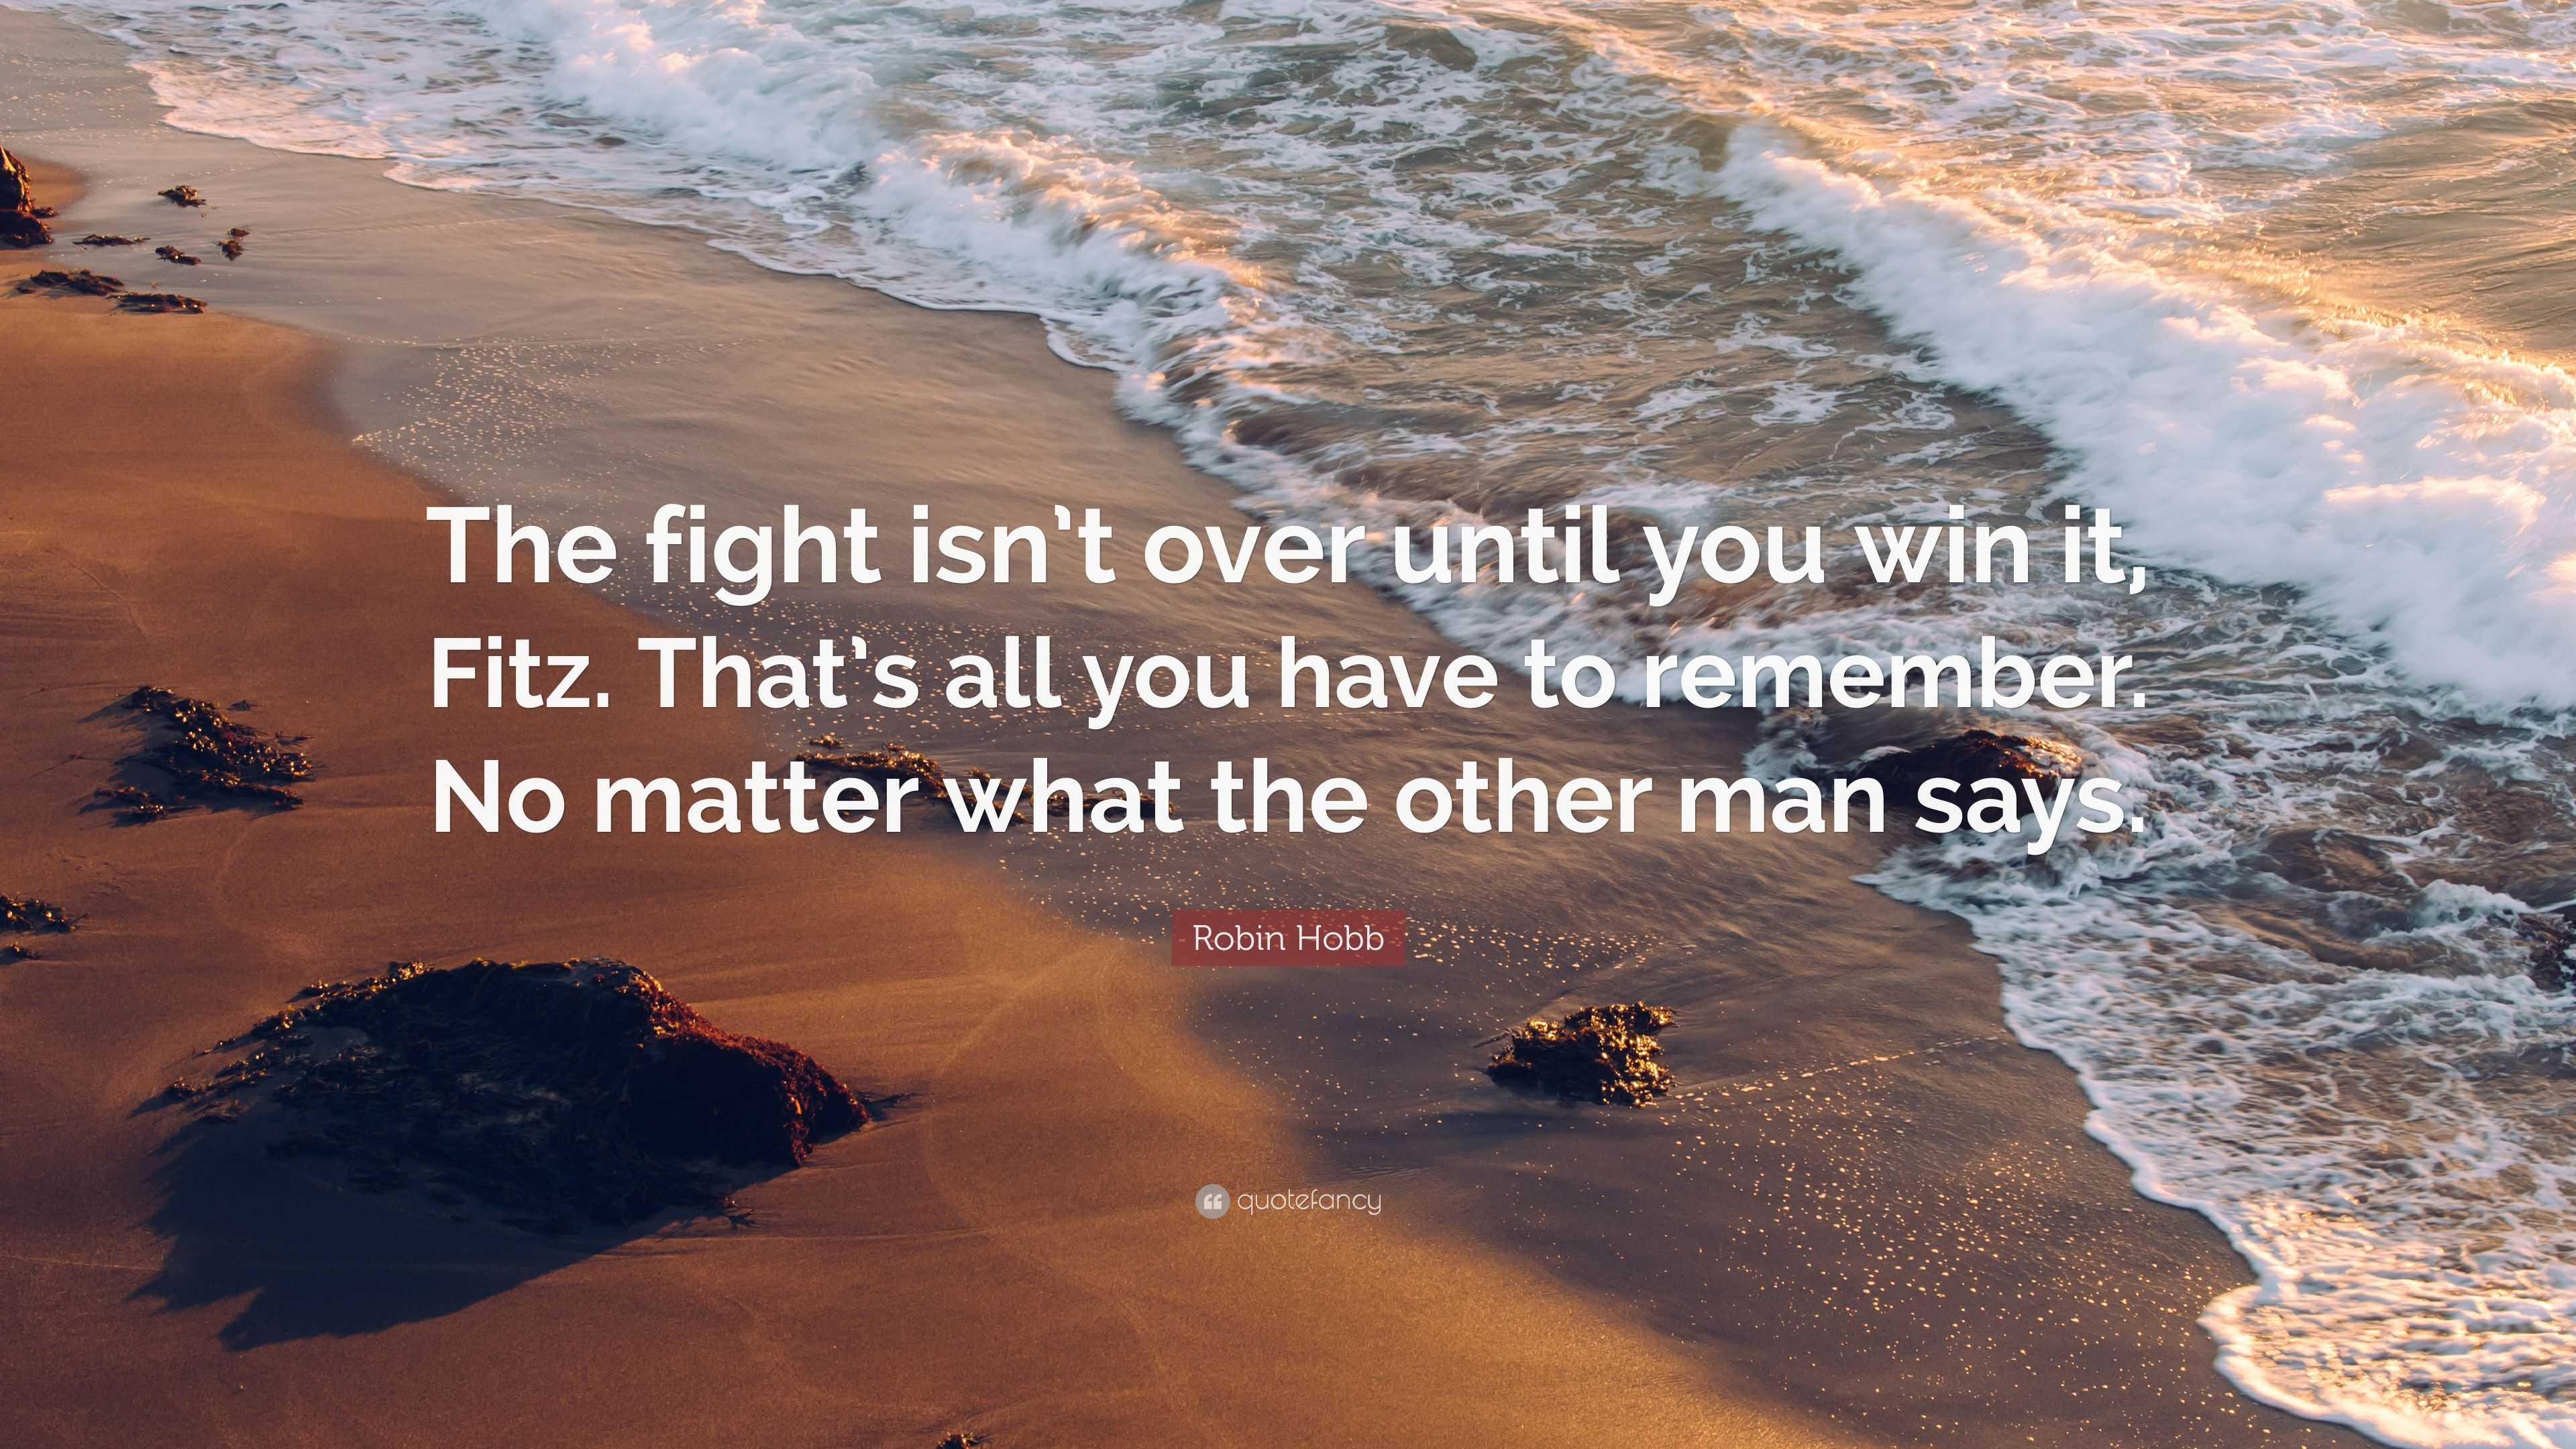 Robin Hobb Quote: “The fight isn’t over until you win it, Fitz. That’s ...